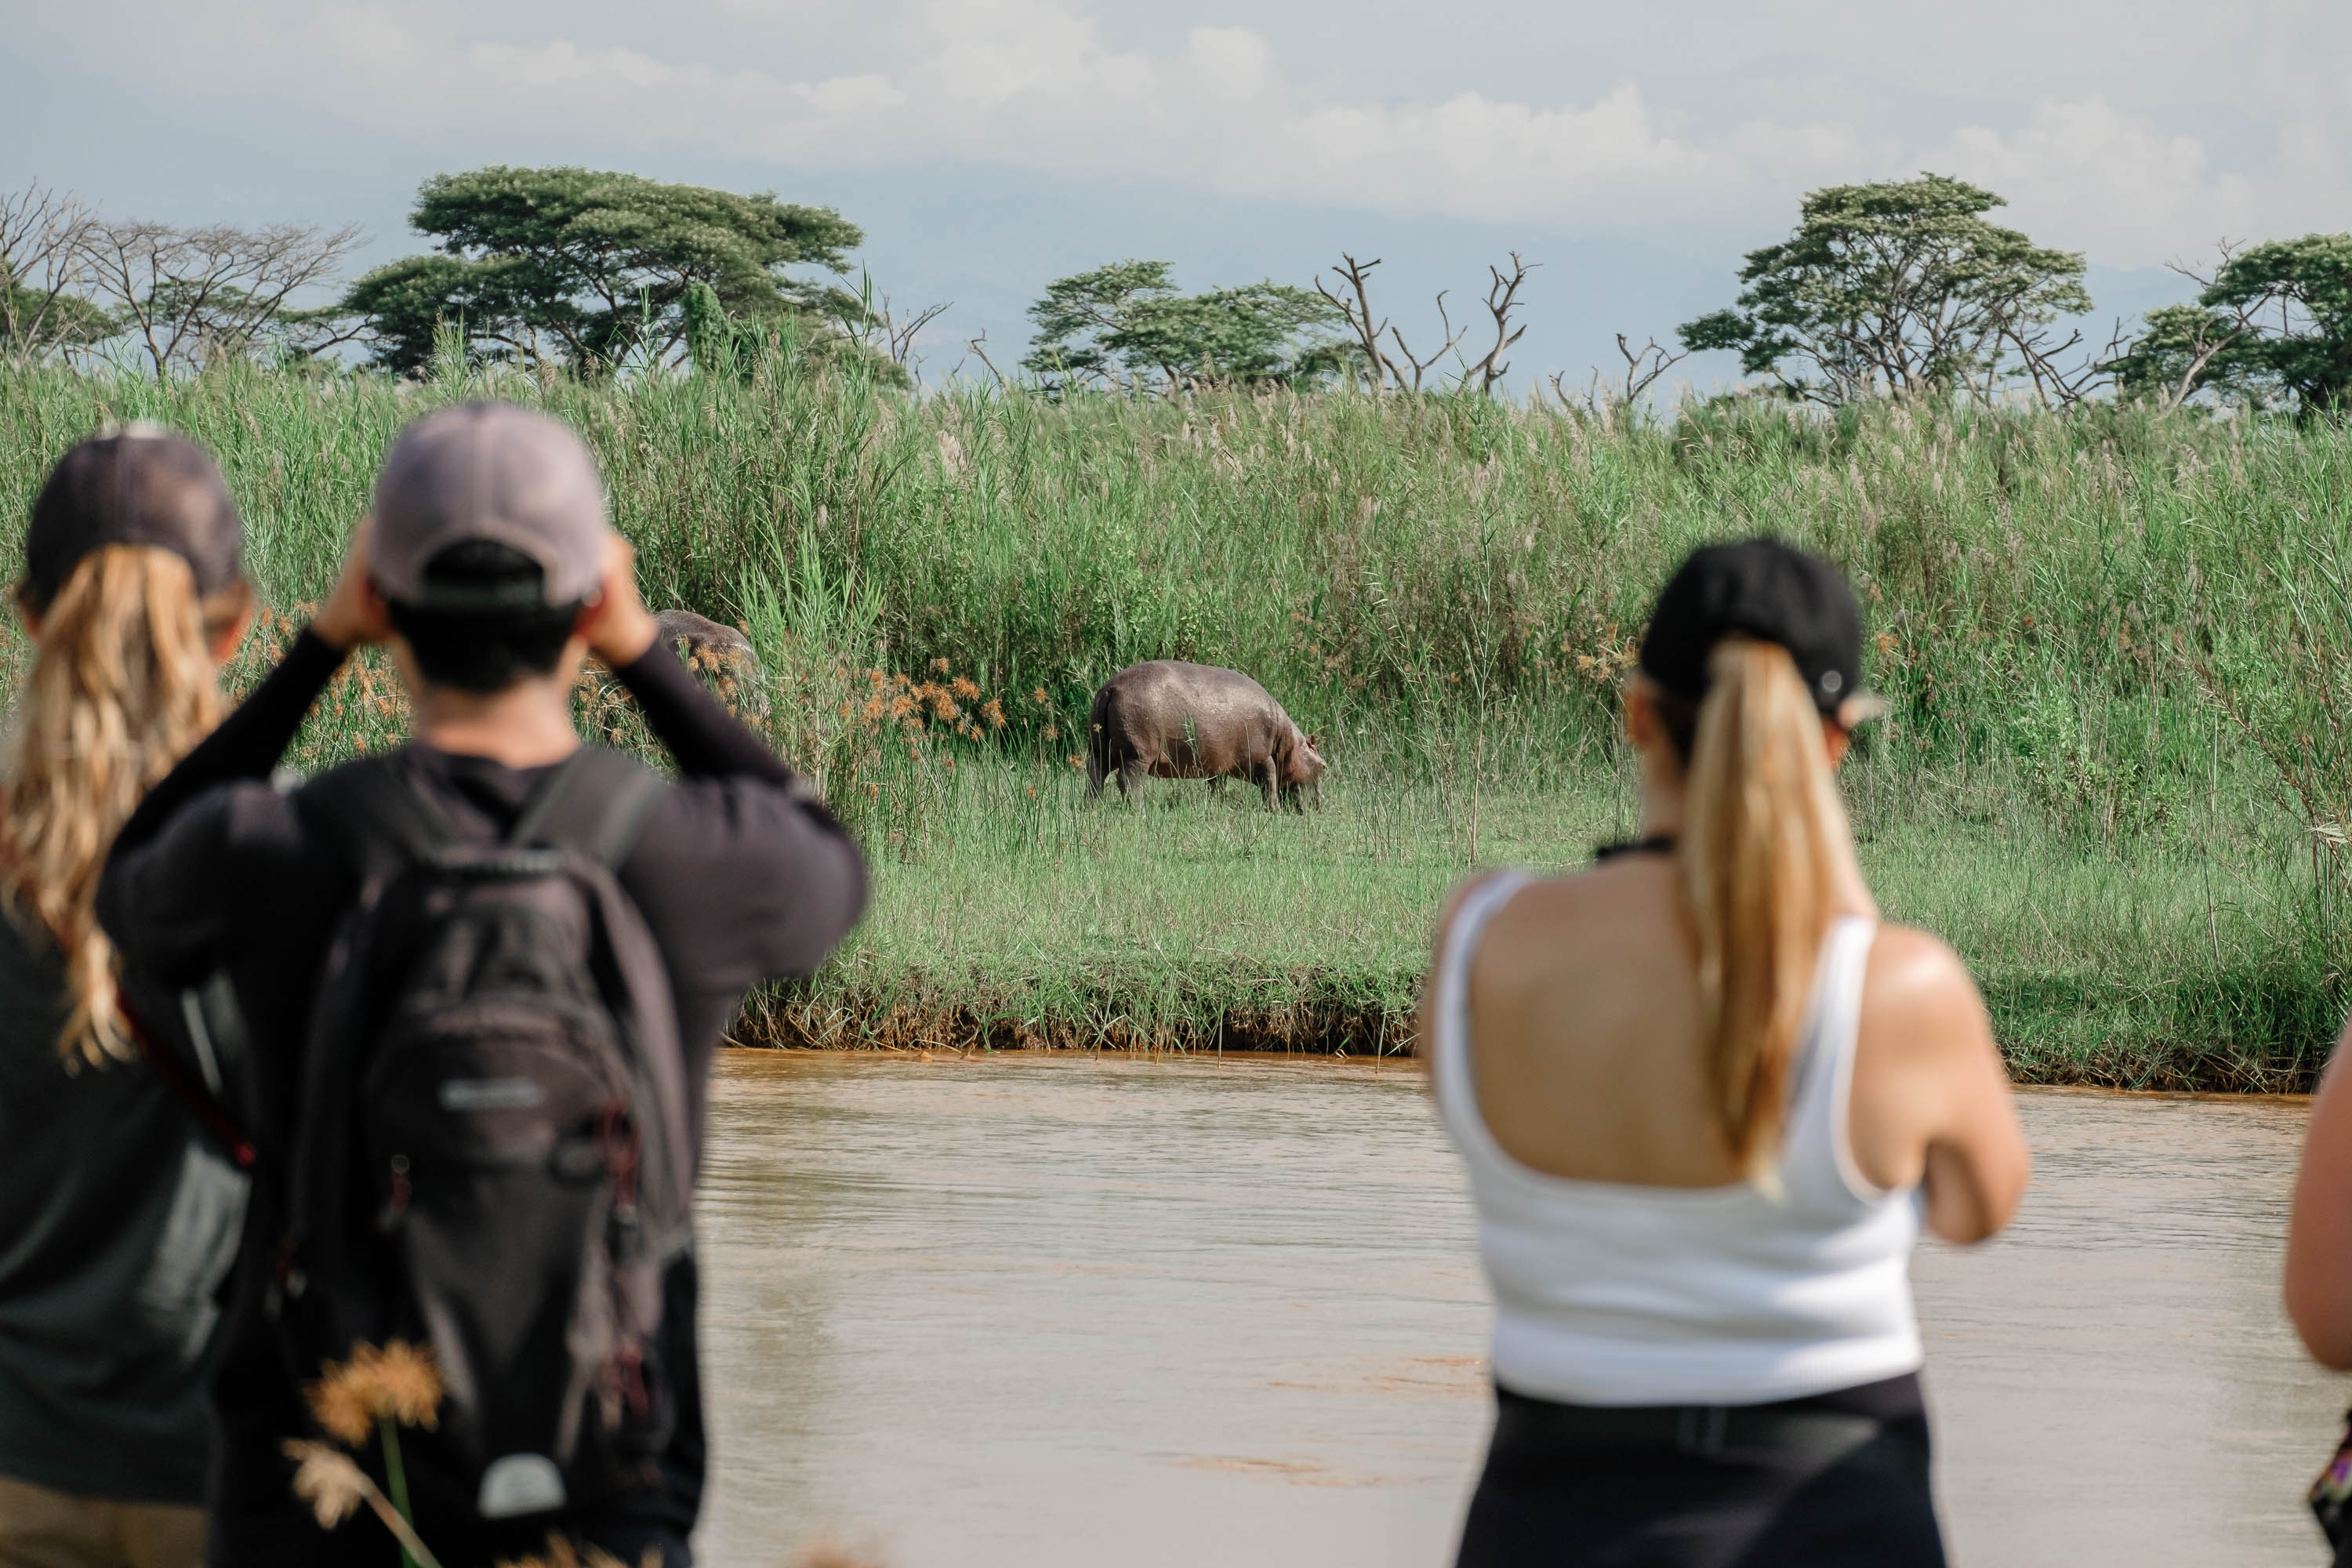 Students spotting hippos in the wild